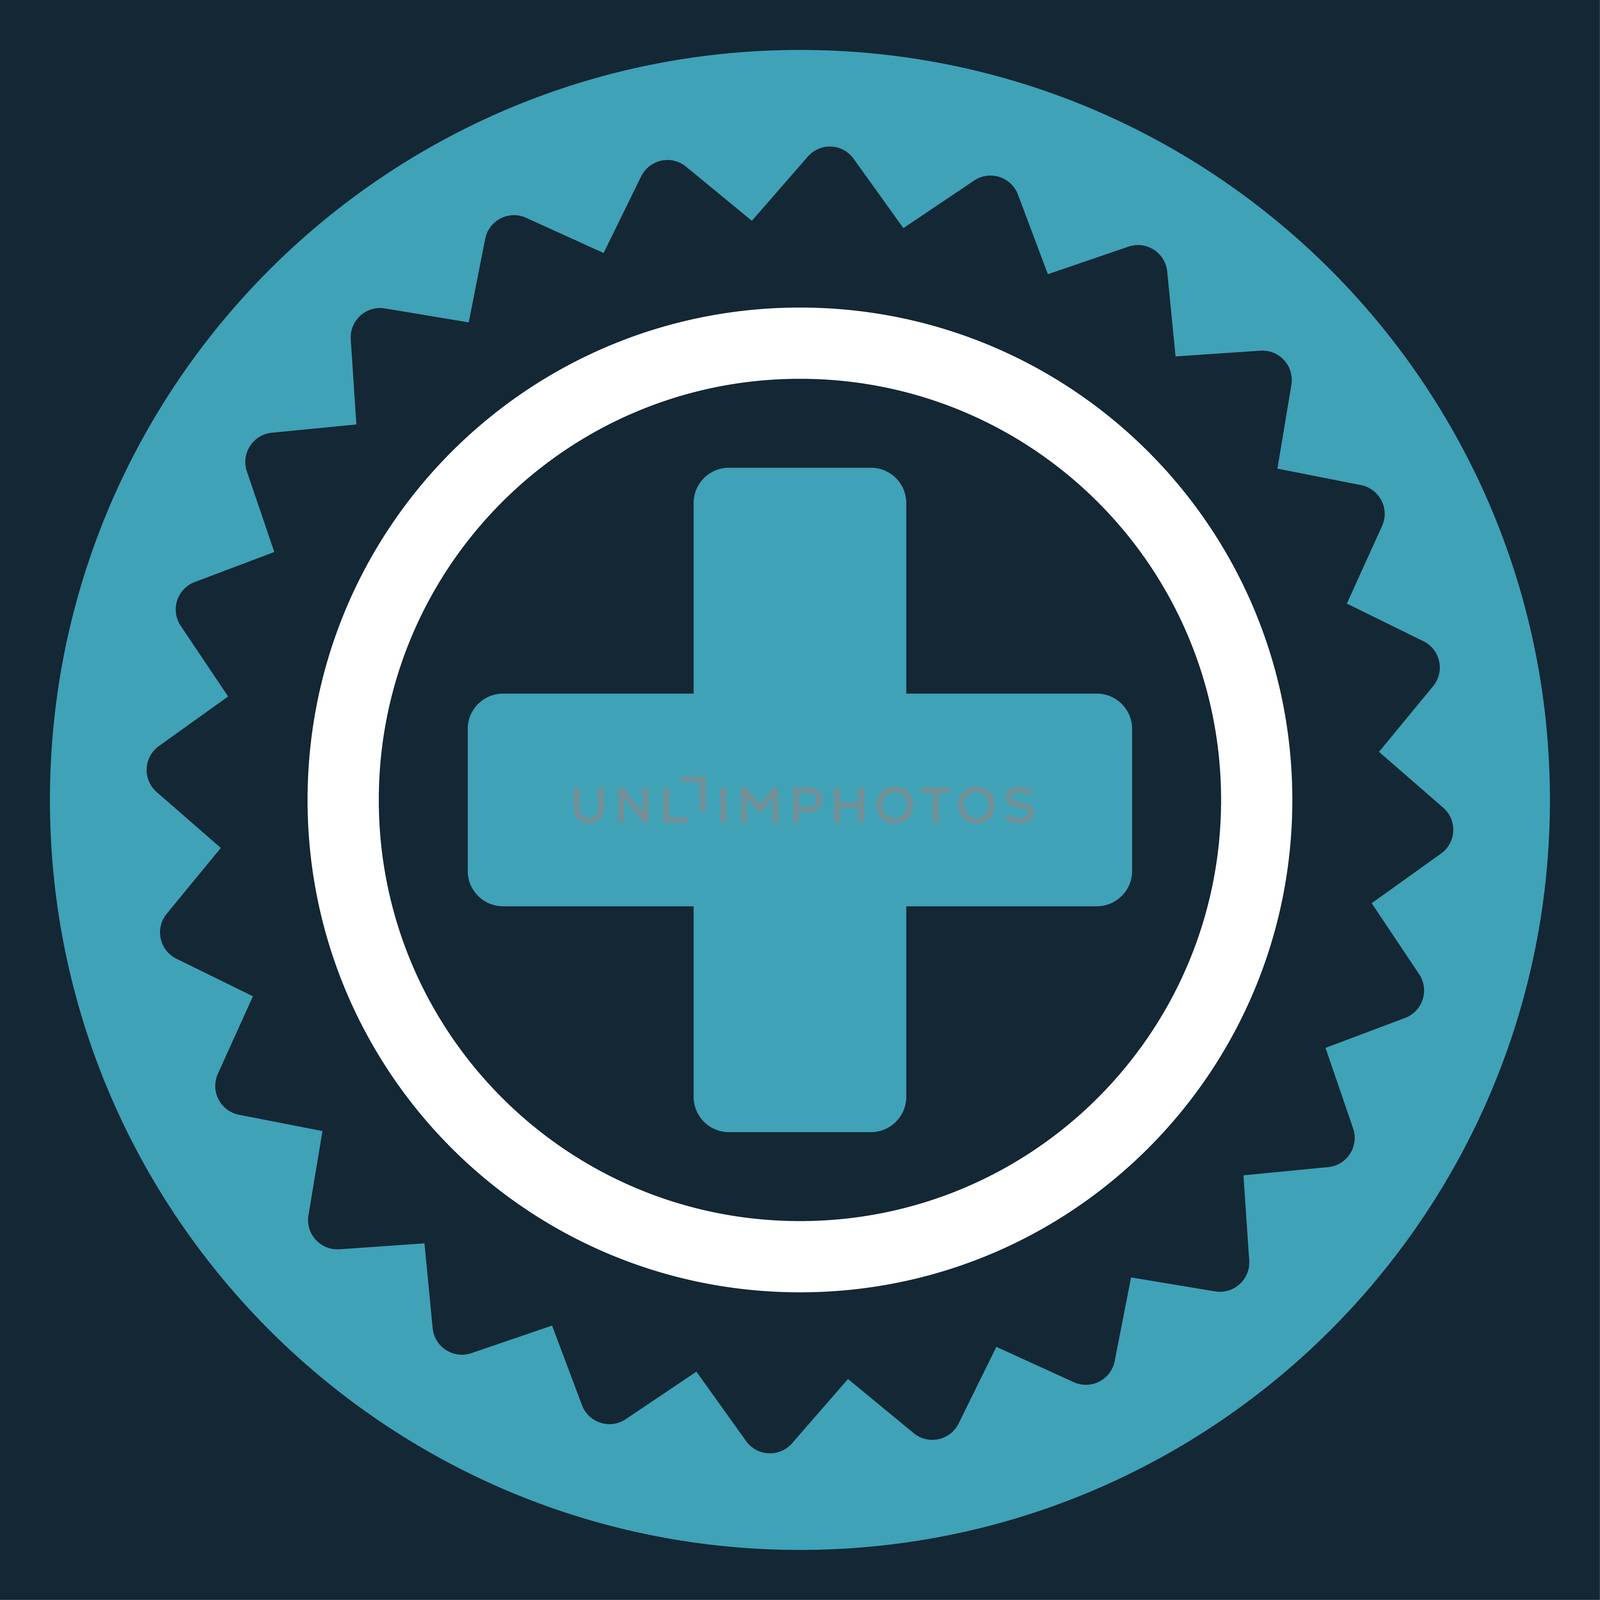 Medical Stamp raster icon. Style is bicolor flat symbol, blue and white colors, rounded angles, dark blue background.